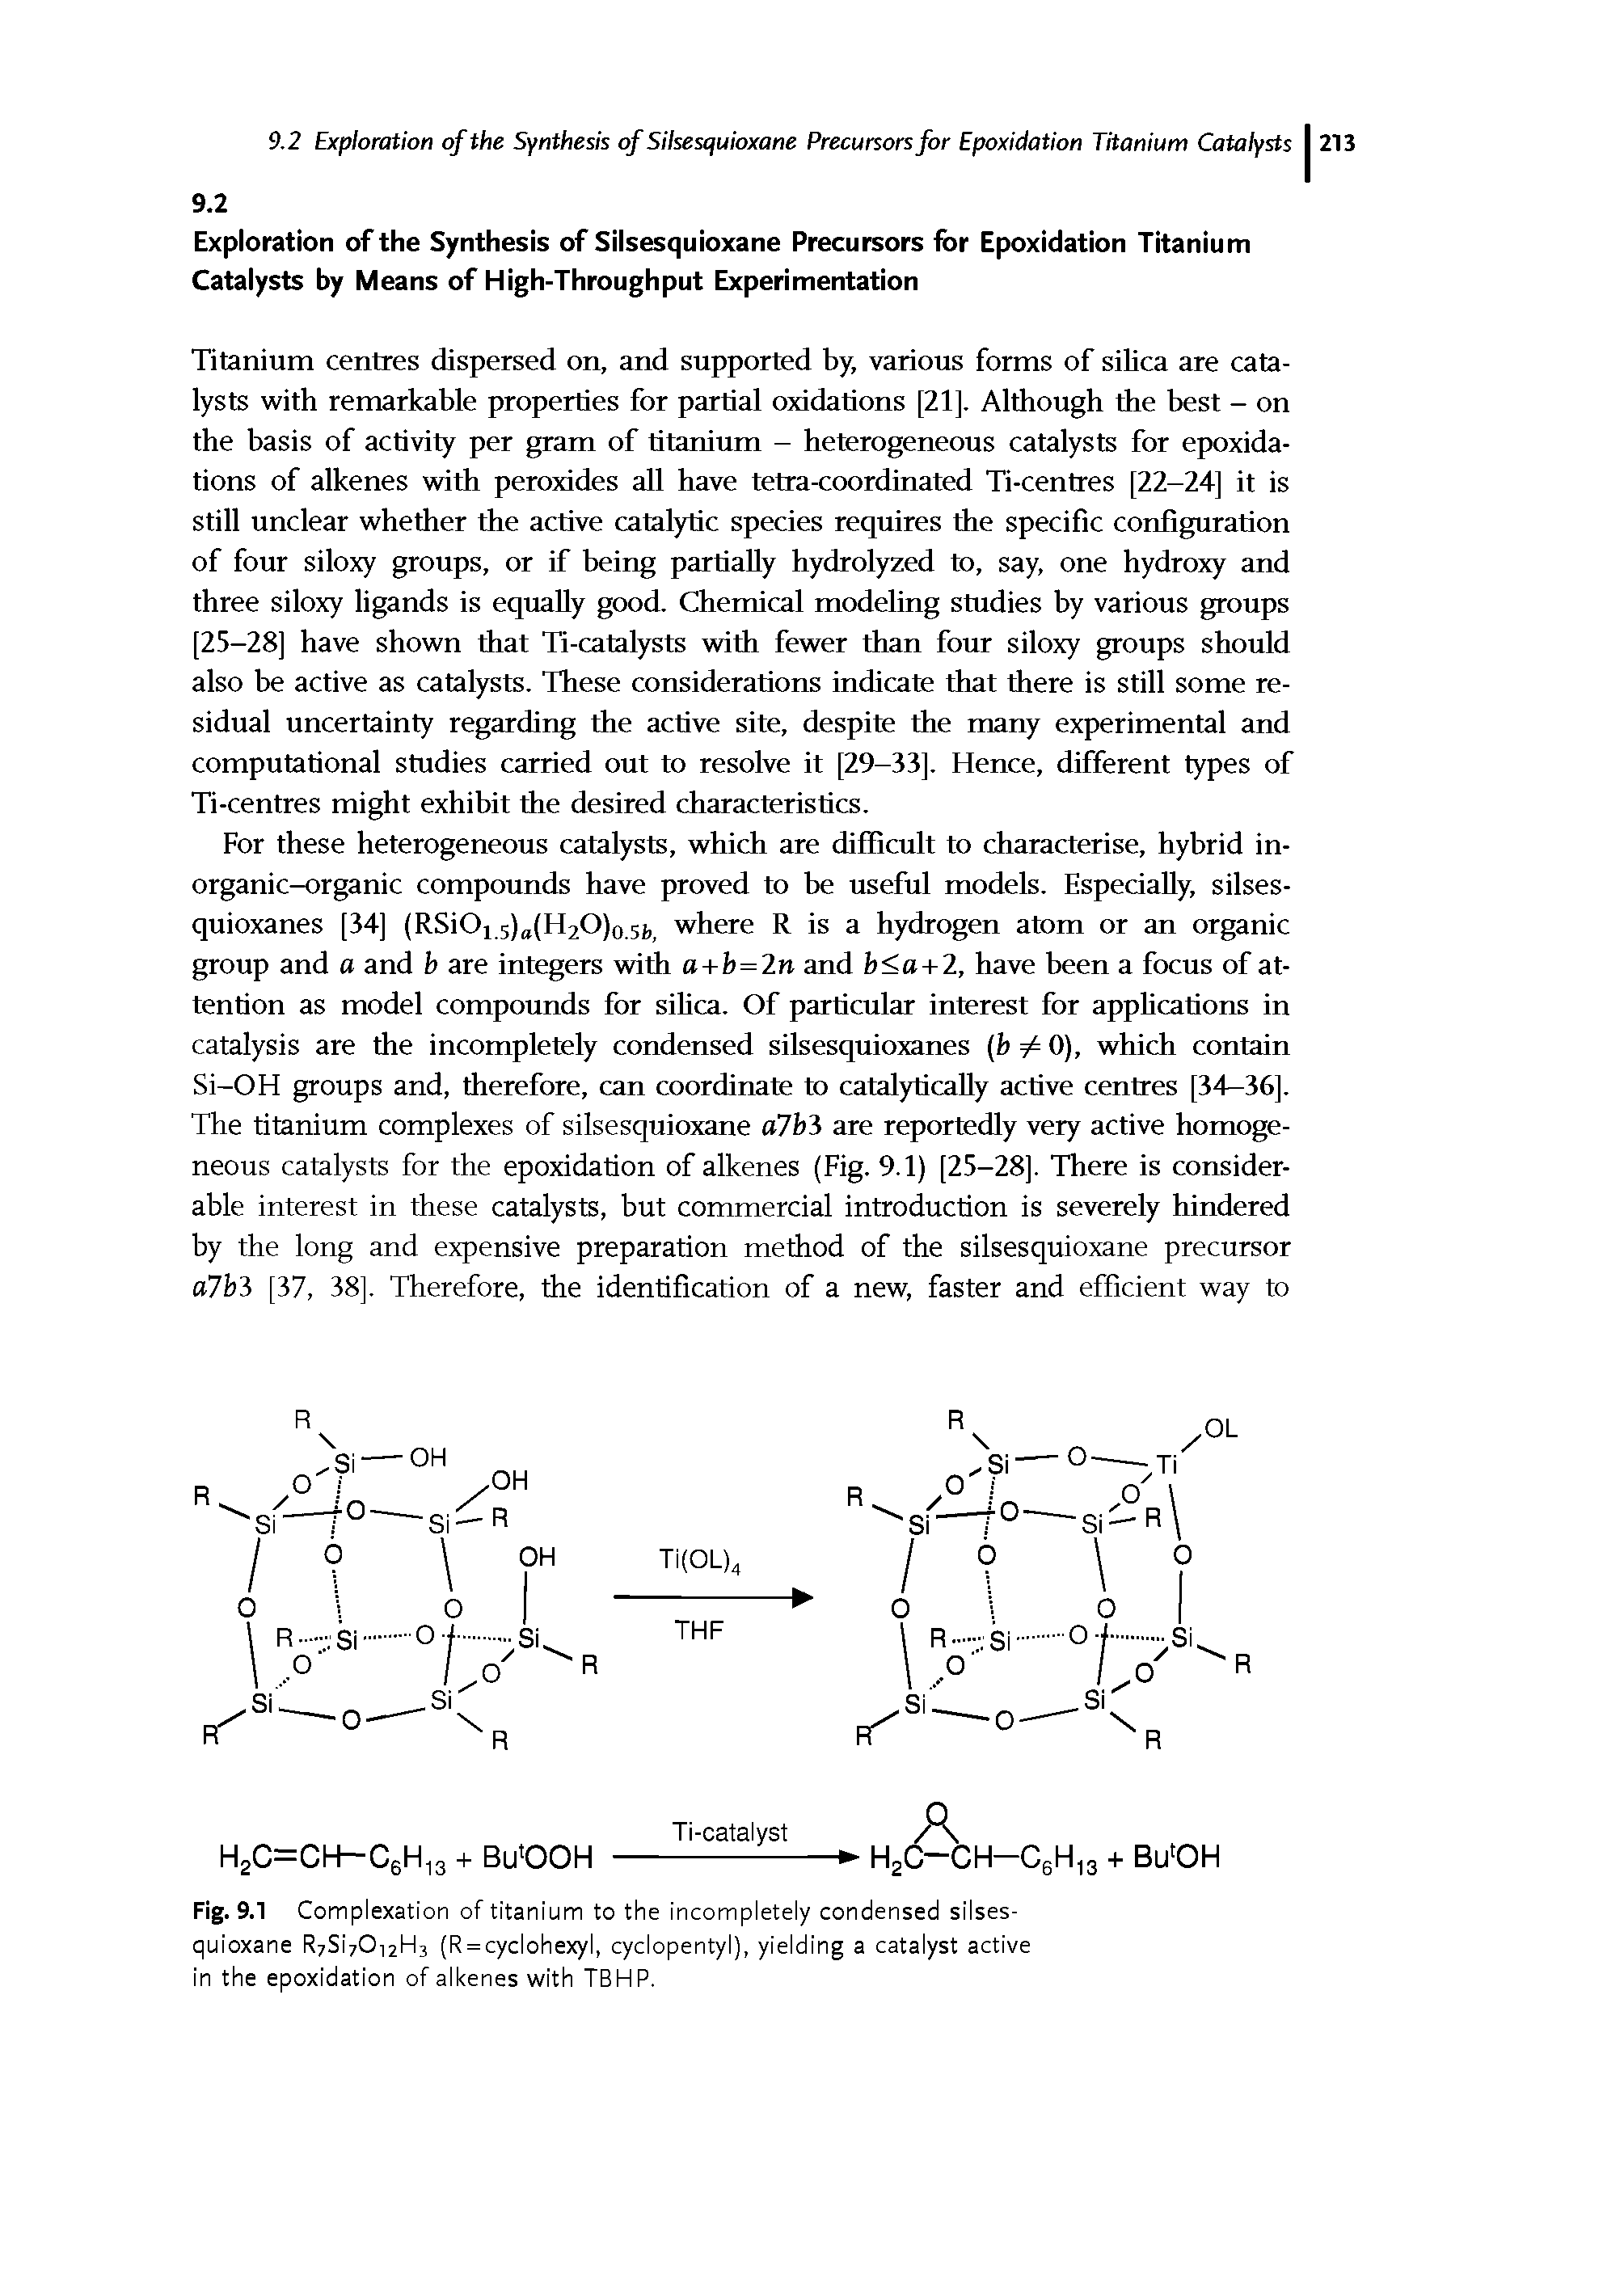 Fig. 9.1 Complexation of titanium to the incompletely condensed silsesquioxane R7Si7012H3 (R = cyclohexyl, cyclopentyl), yielding a catalyst active in the epoxidation of alkenes with TBHP.